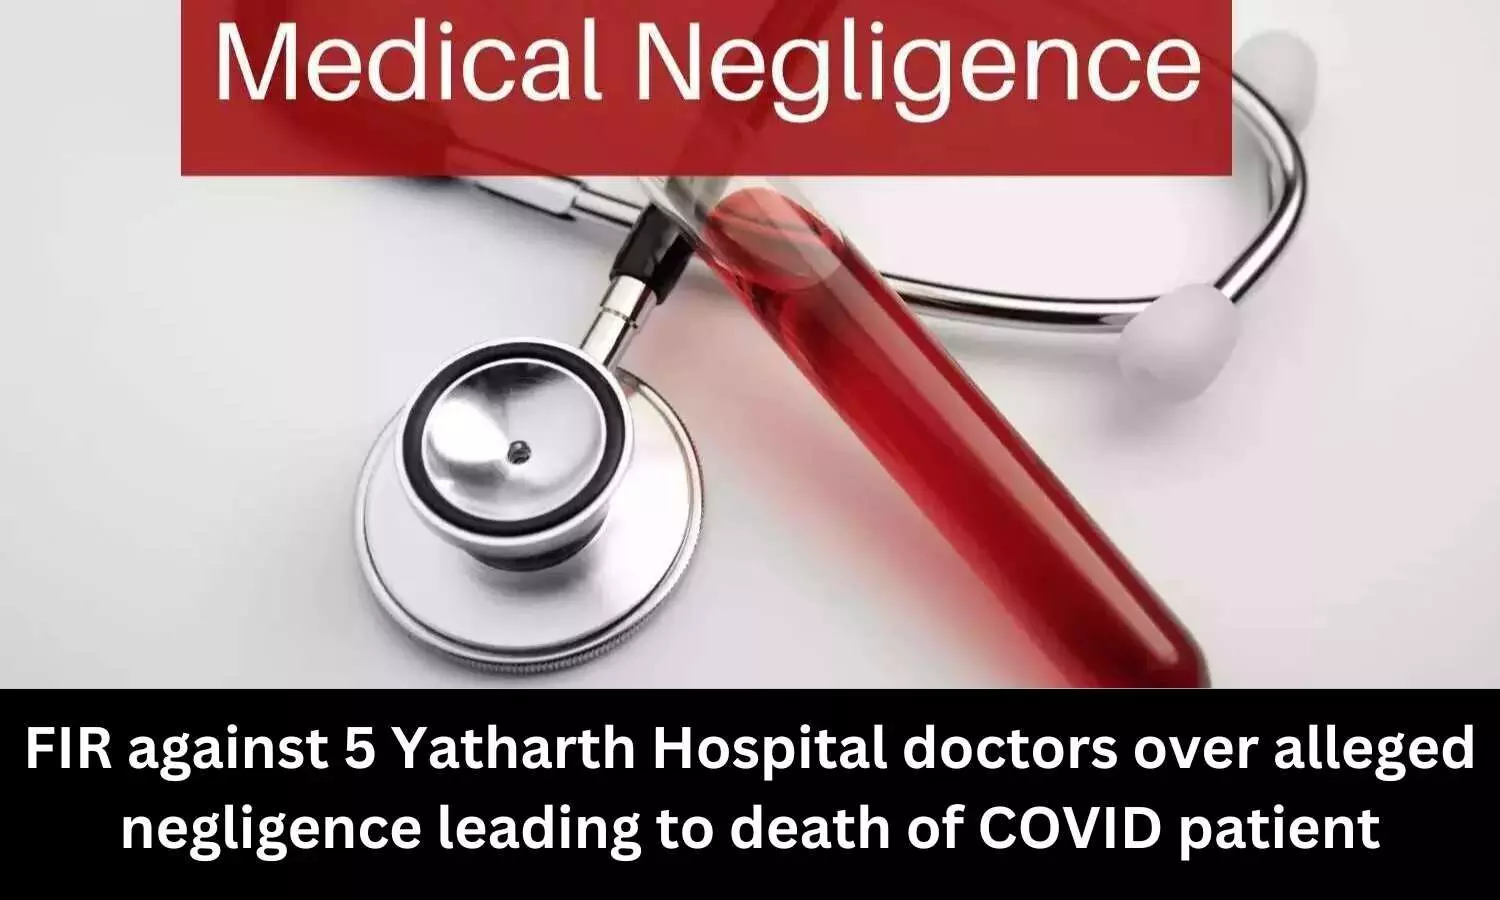 FIR against 5 Yatharth Hospital doctors over alleged negligence leading to death of COVID patient